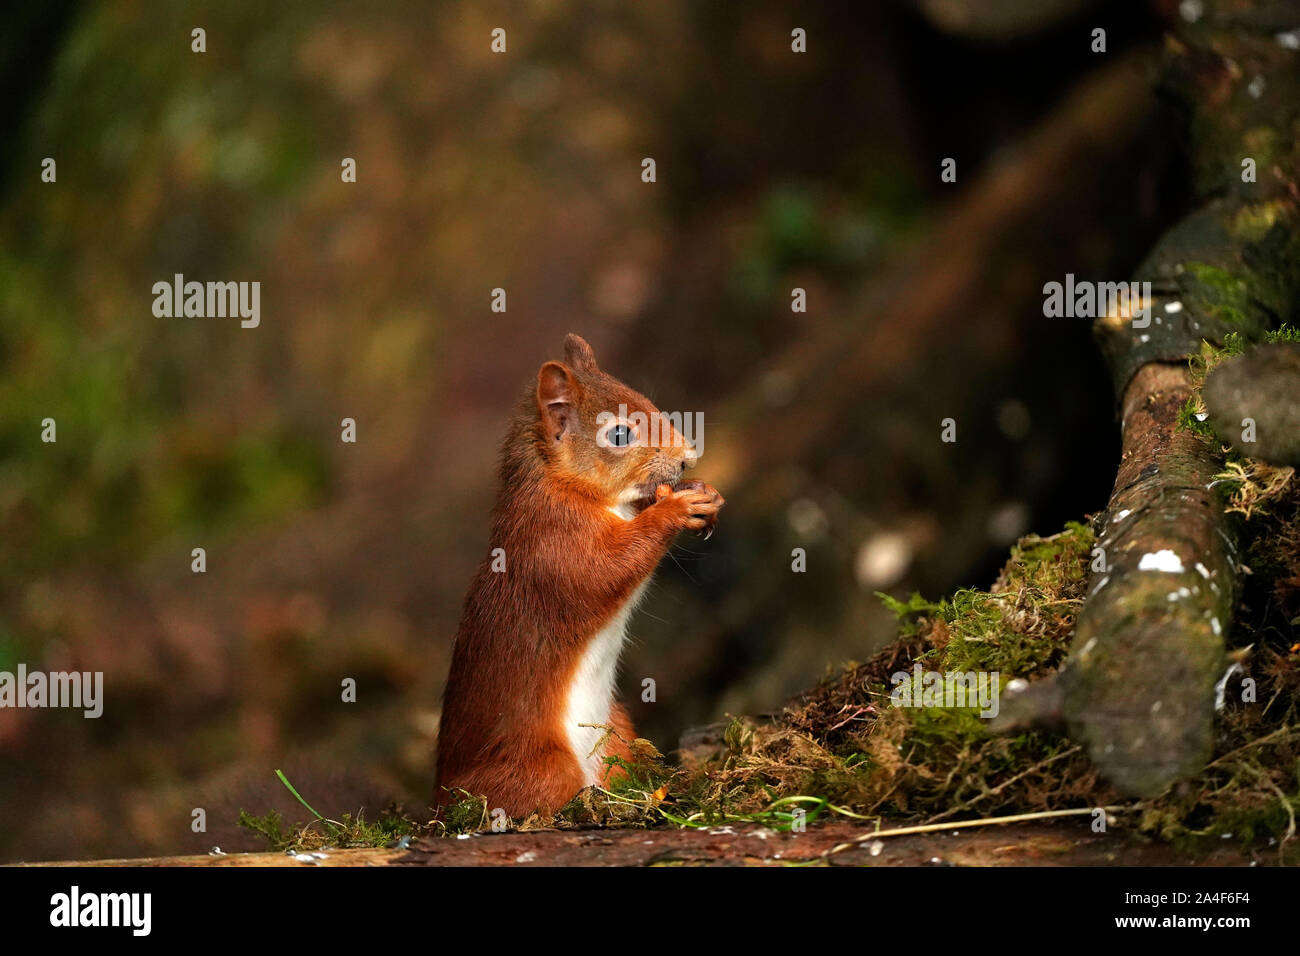 Cute Red Squirrel Stock Photo